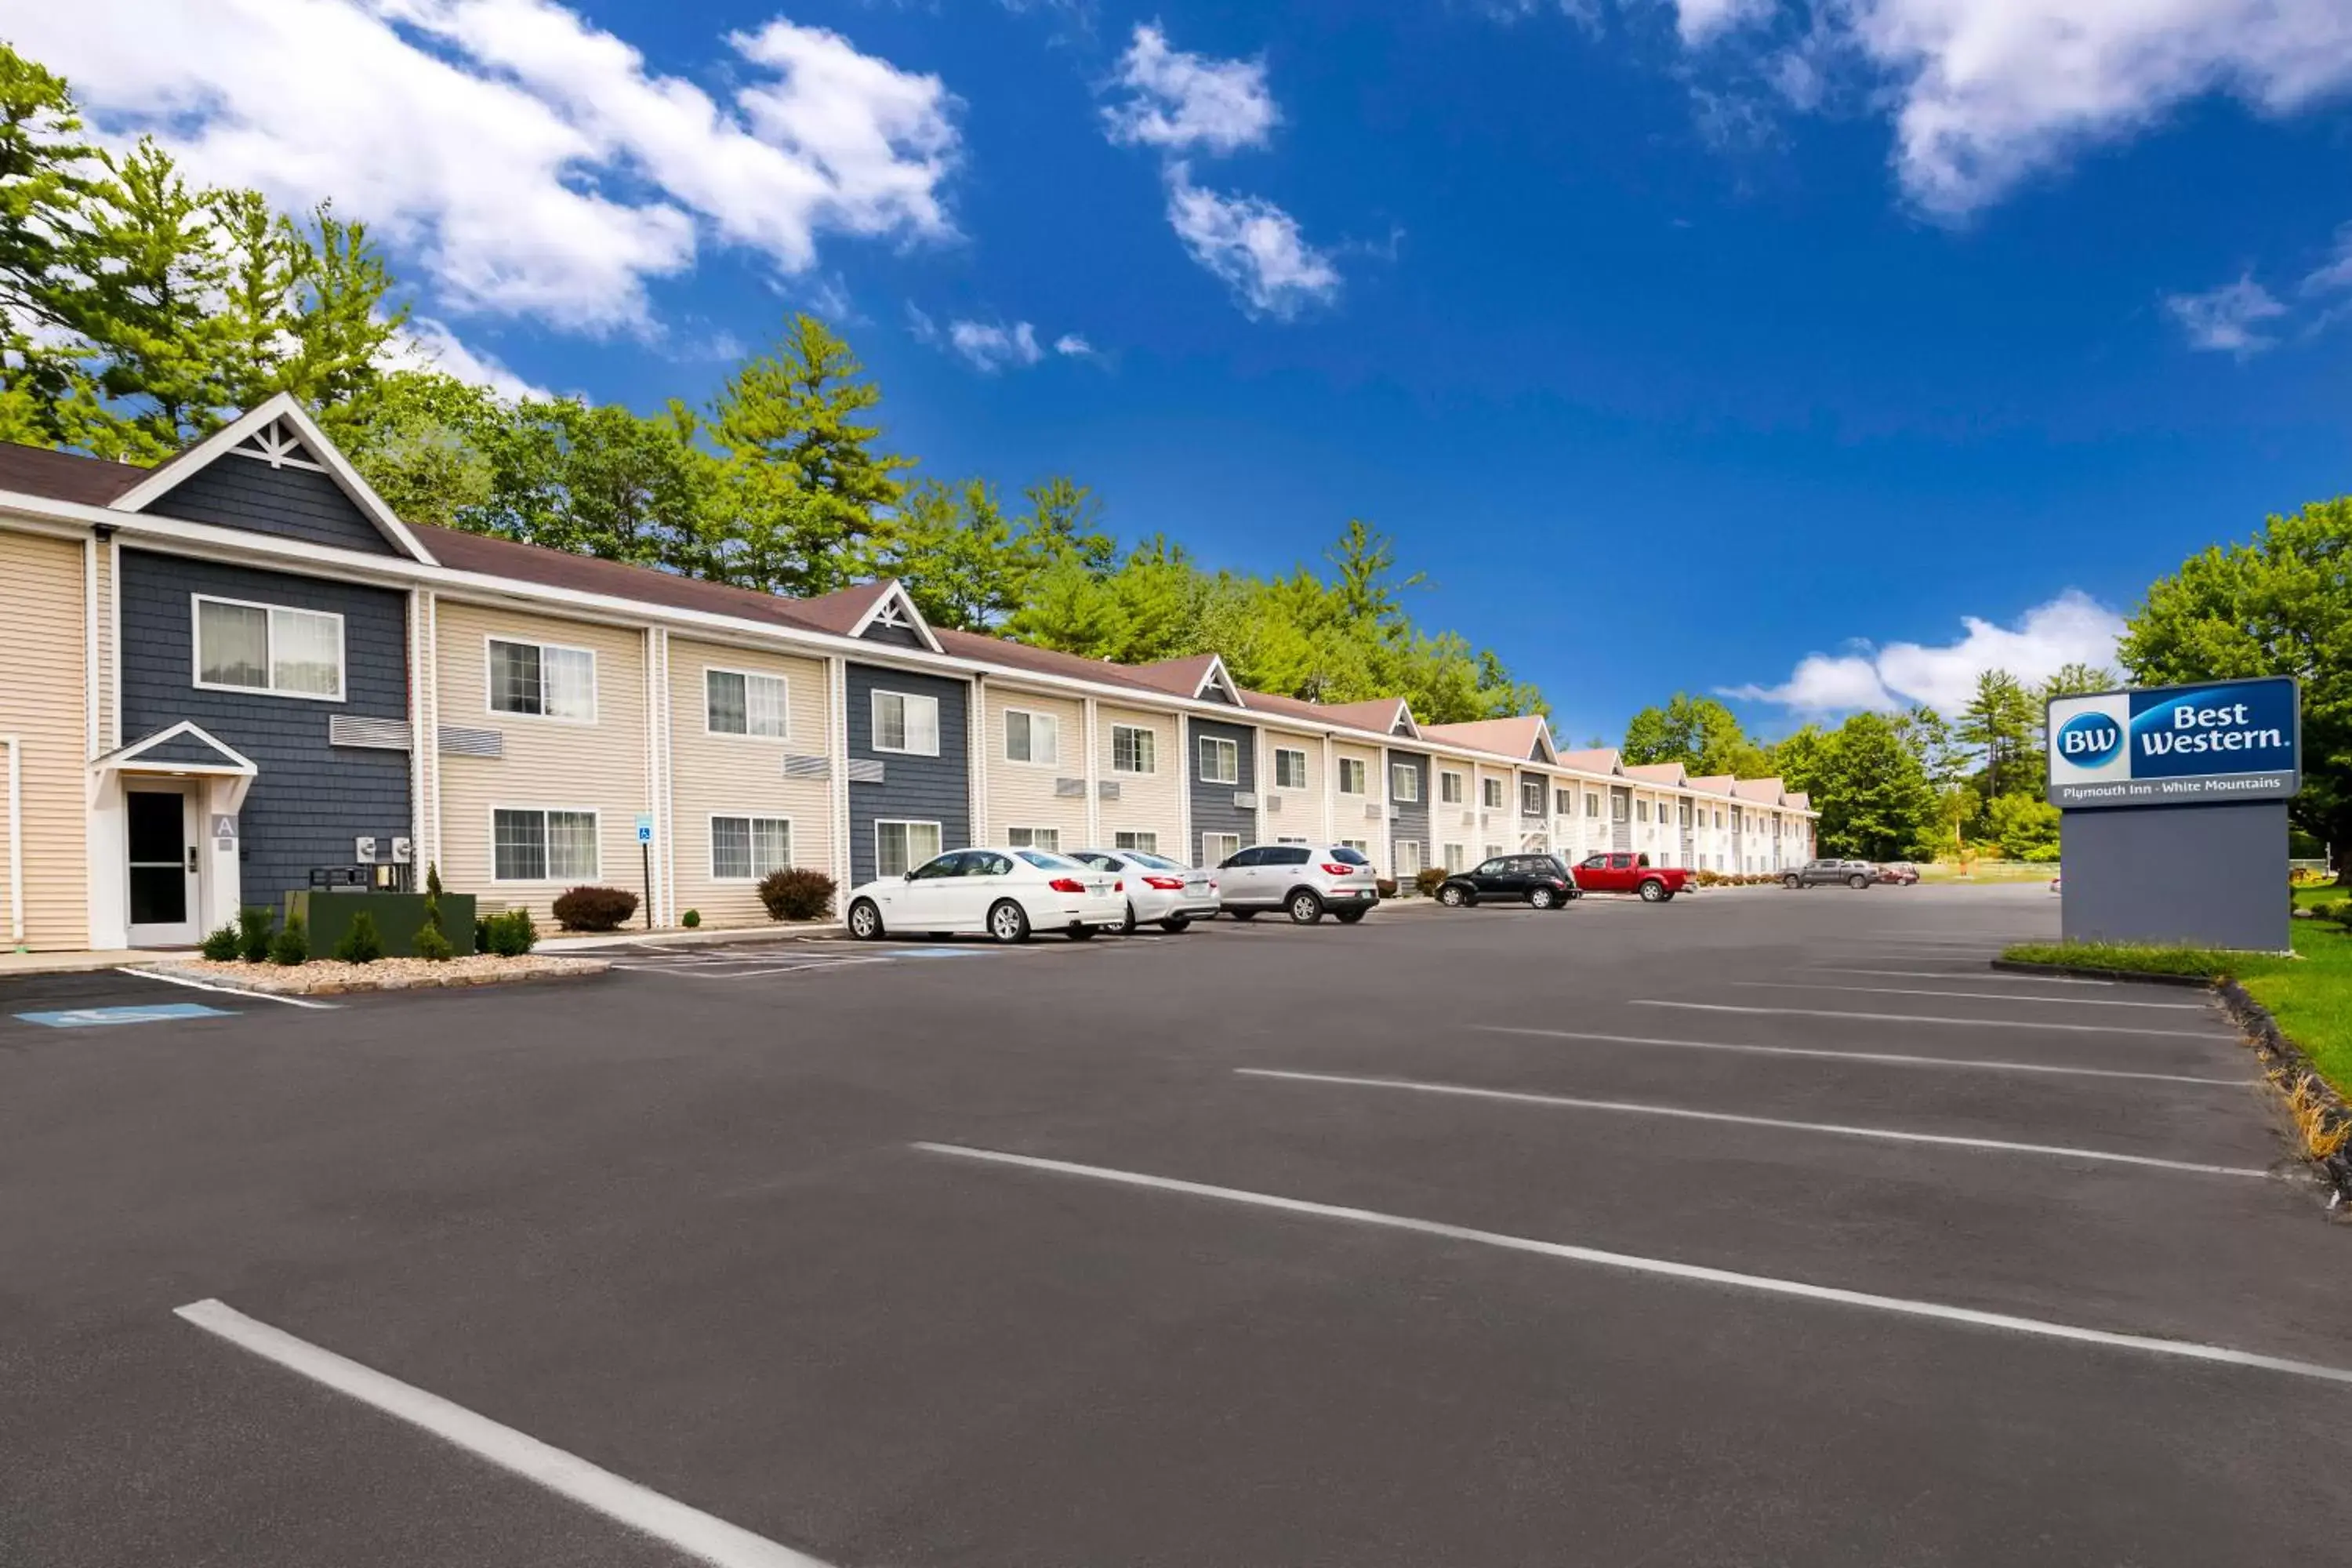 Property Building in Best Western Plymouth Inn-White Mountains